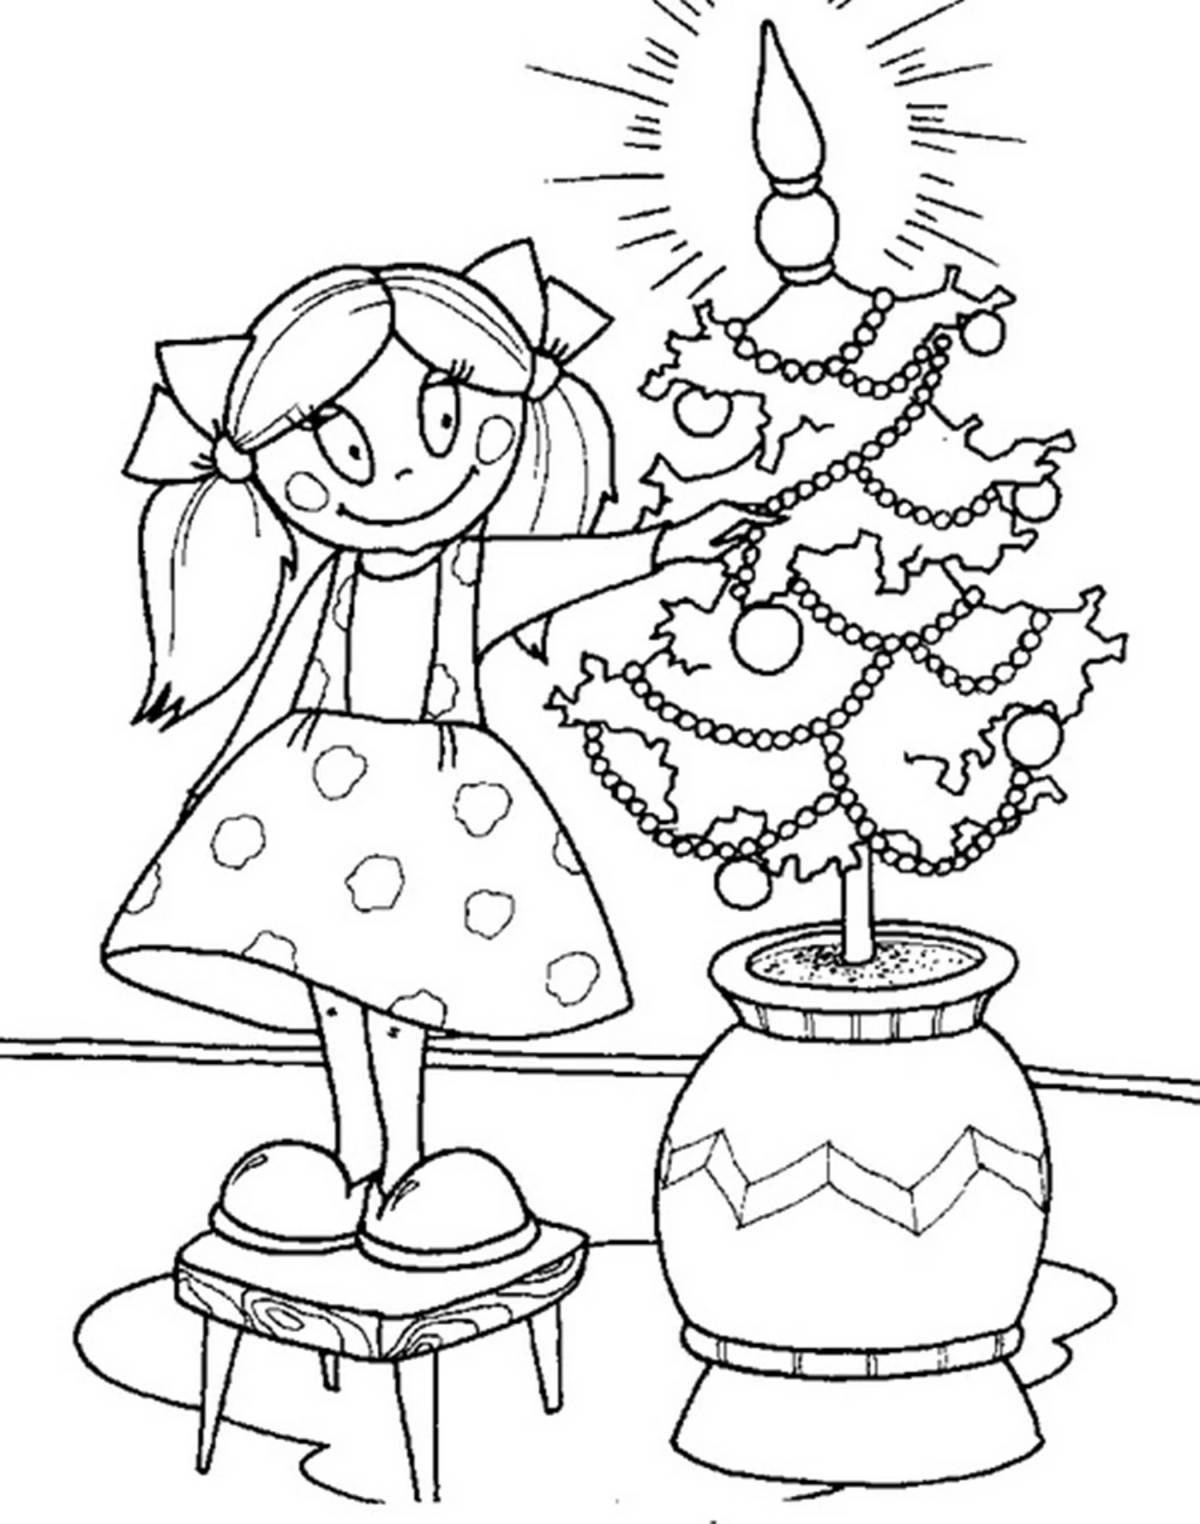 Safe Christmas coloring book full of colors